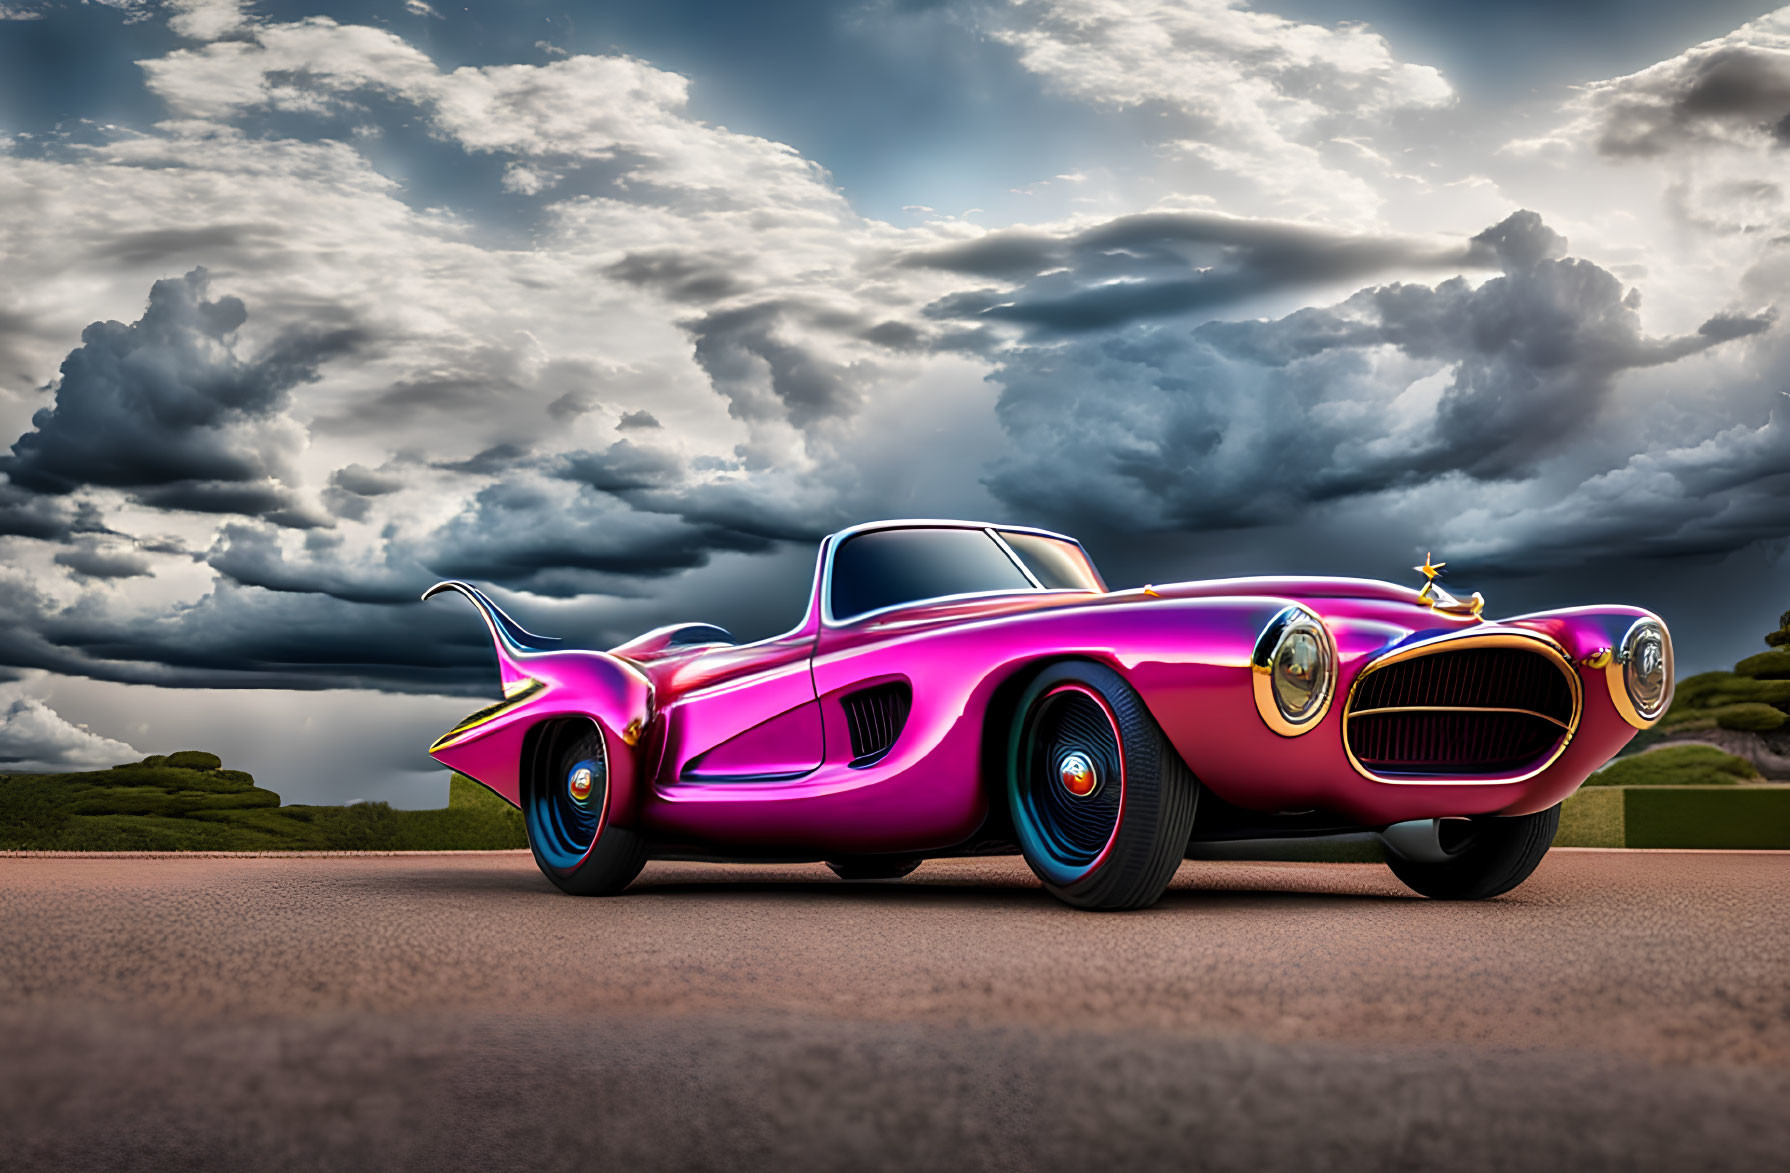 Pink classic convertible with exaggerated tailfins under dramatic cloudy sky